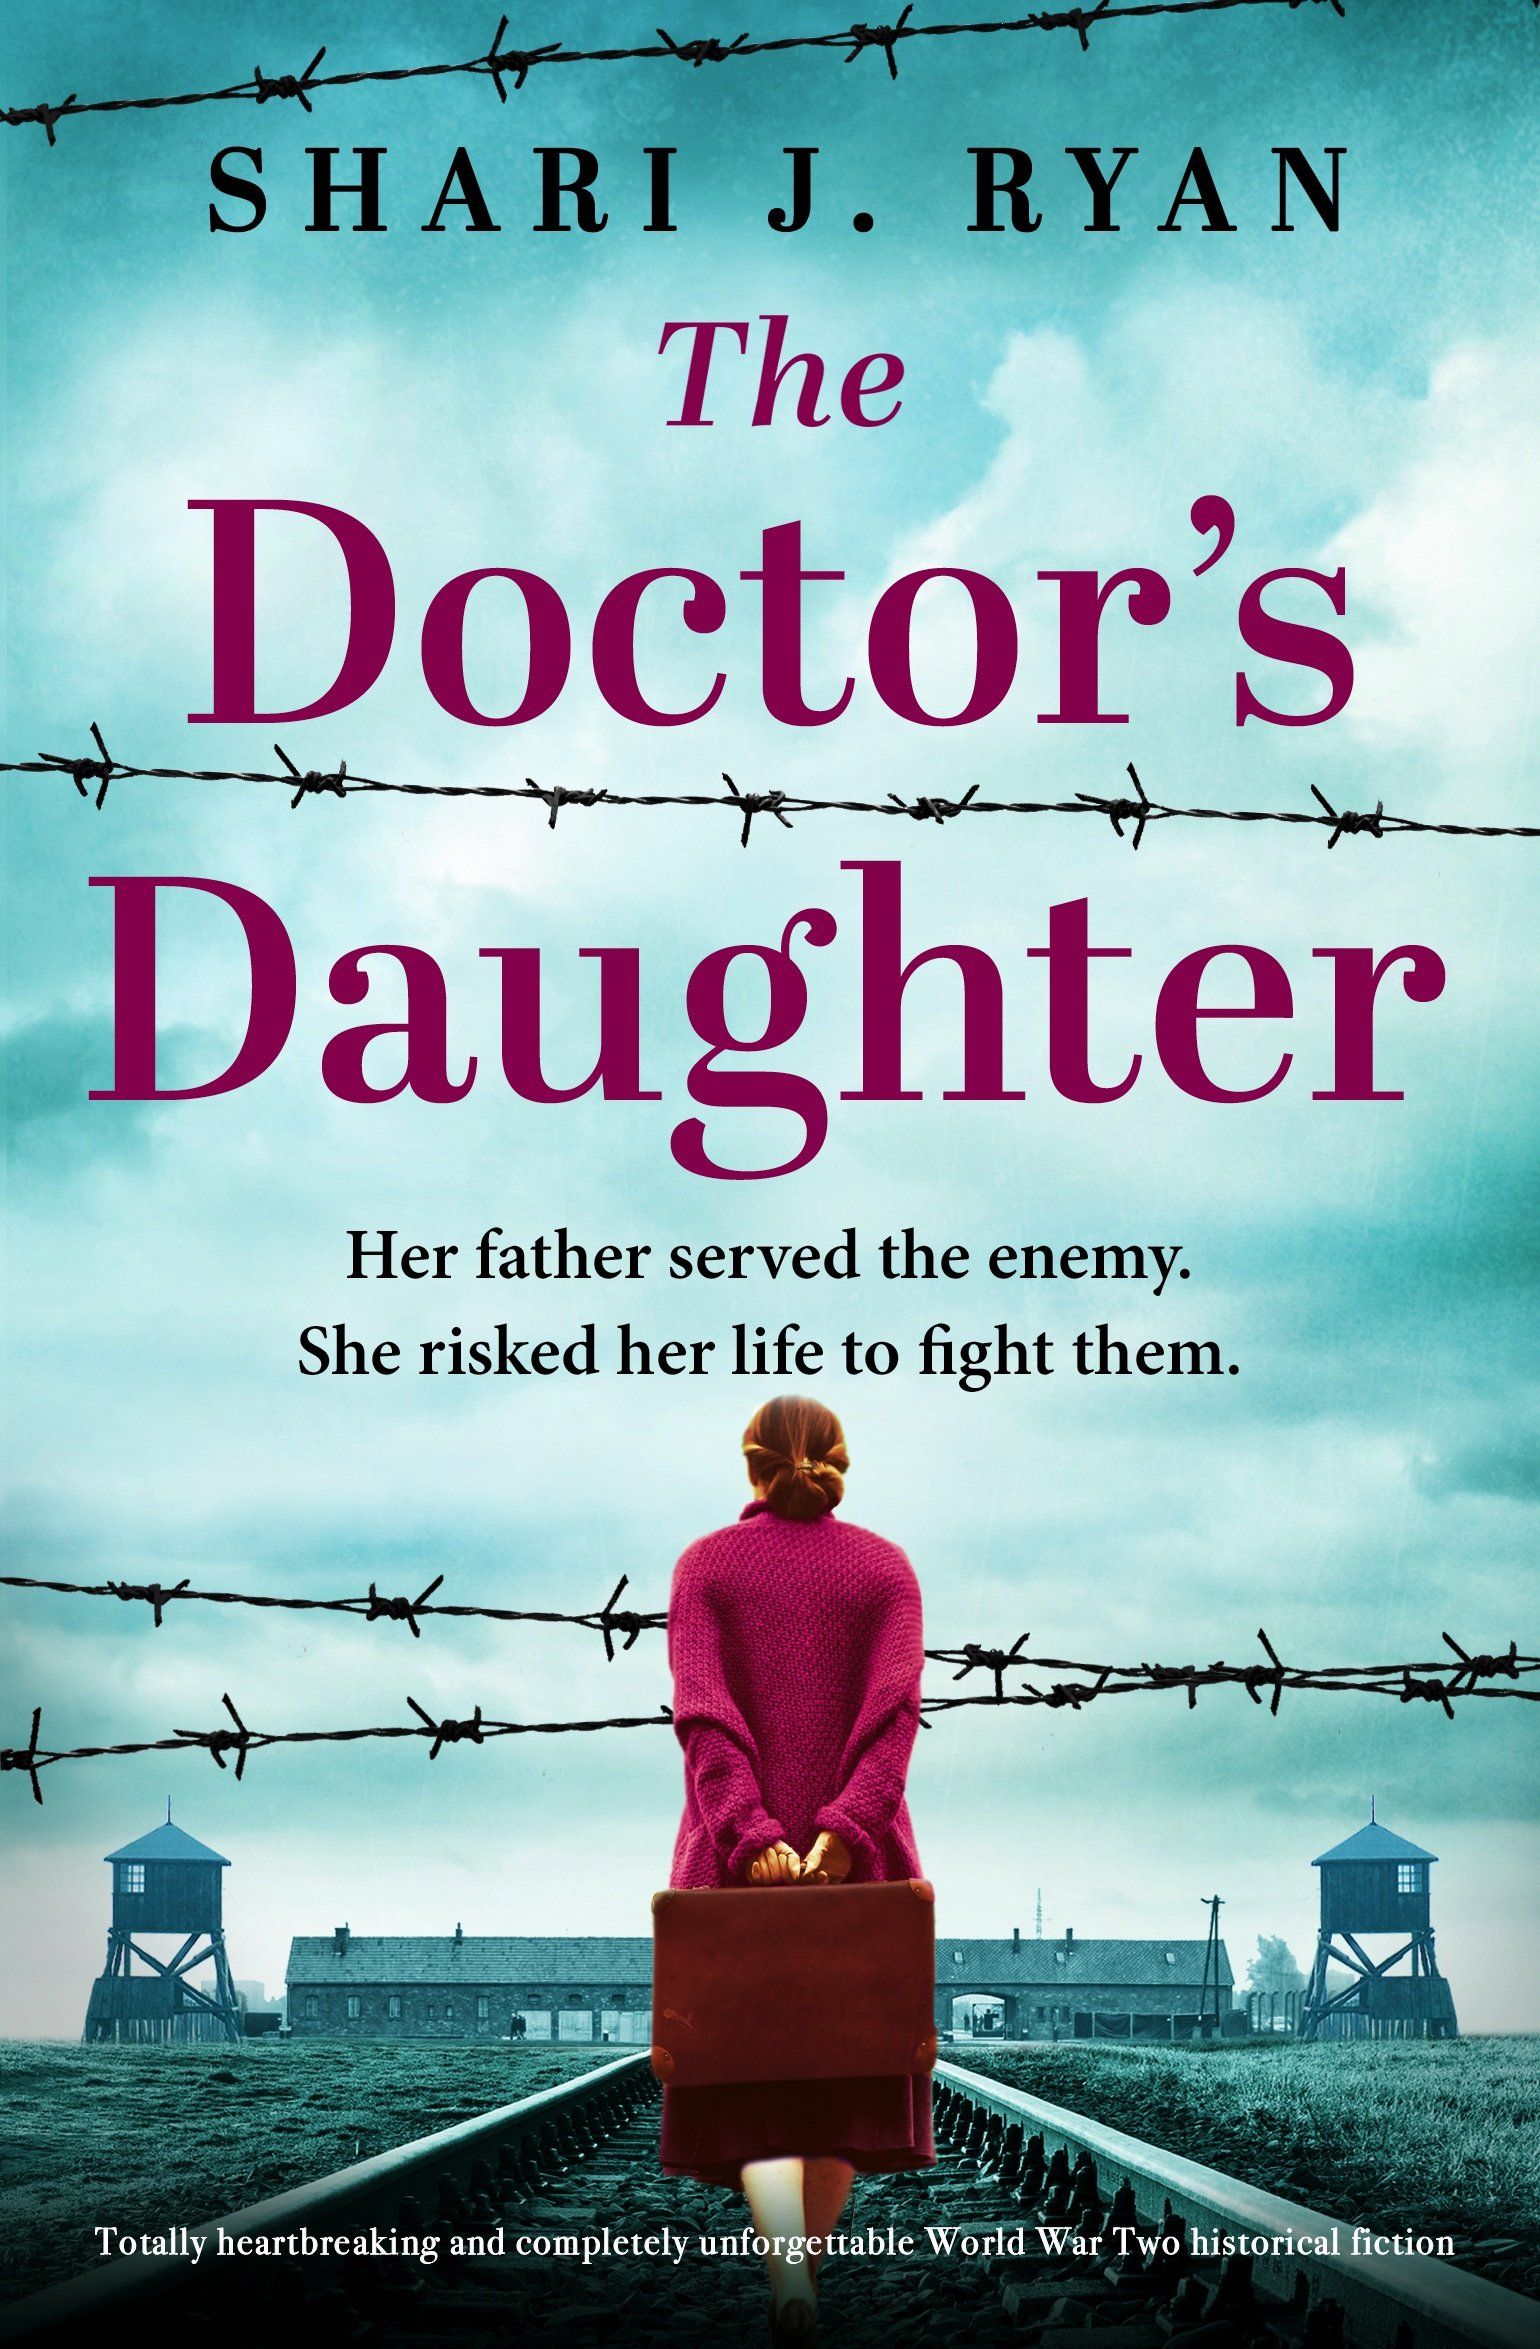 The Doctor's Daughter by Shari J. Ryan